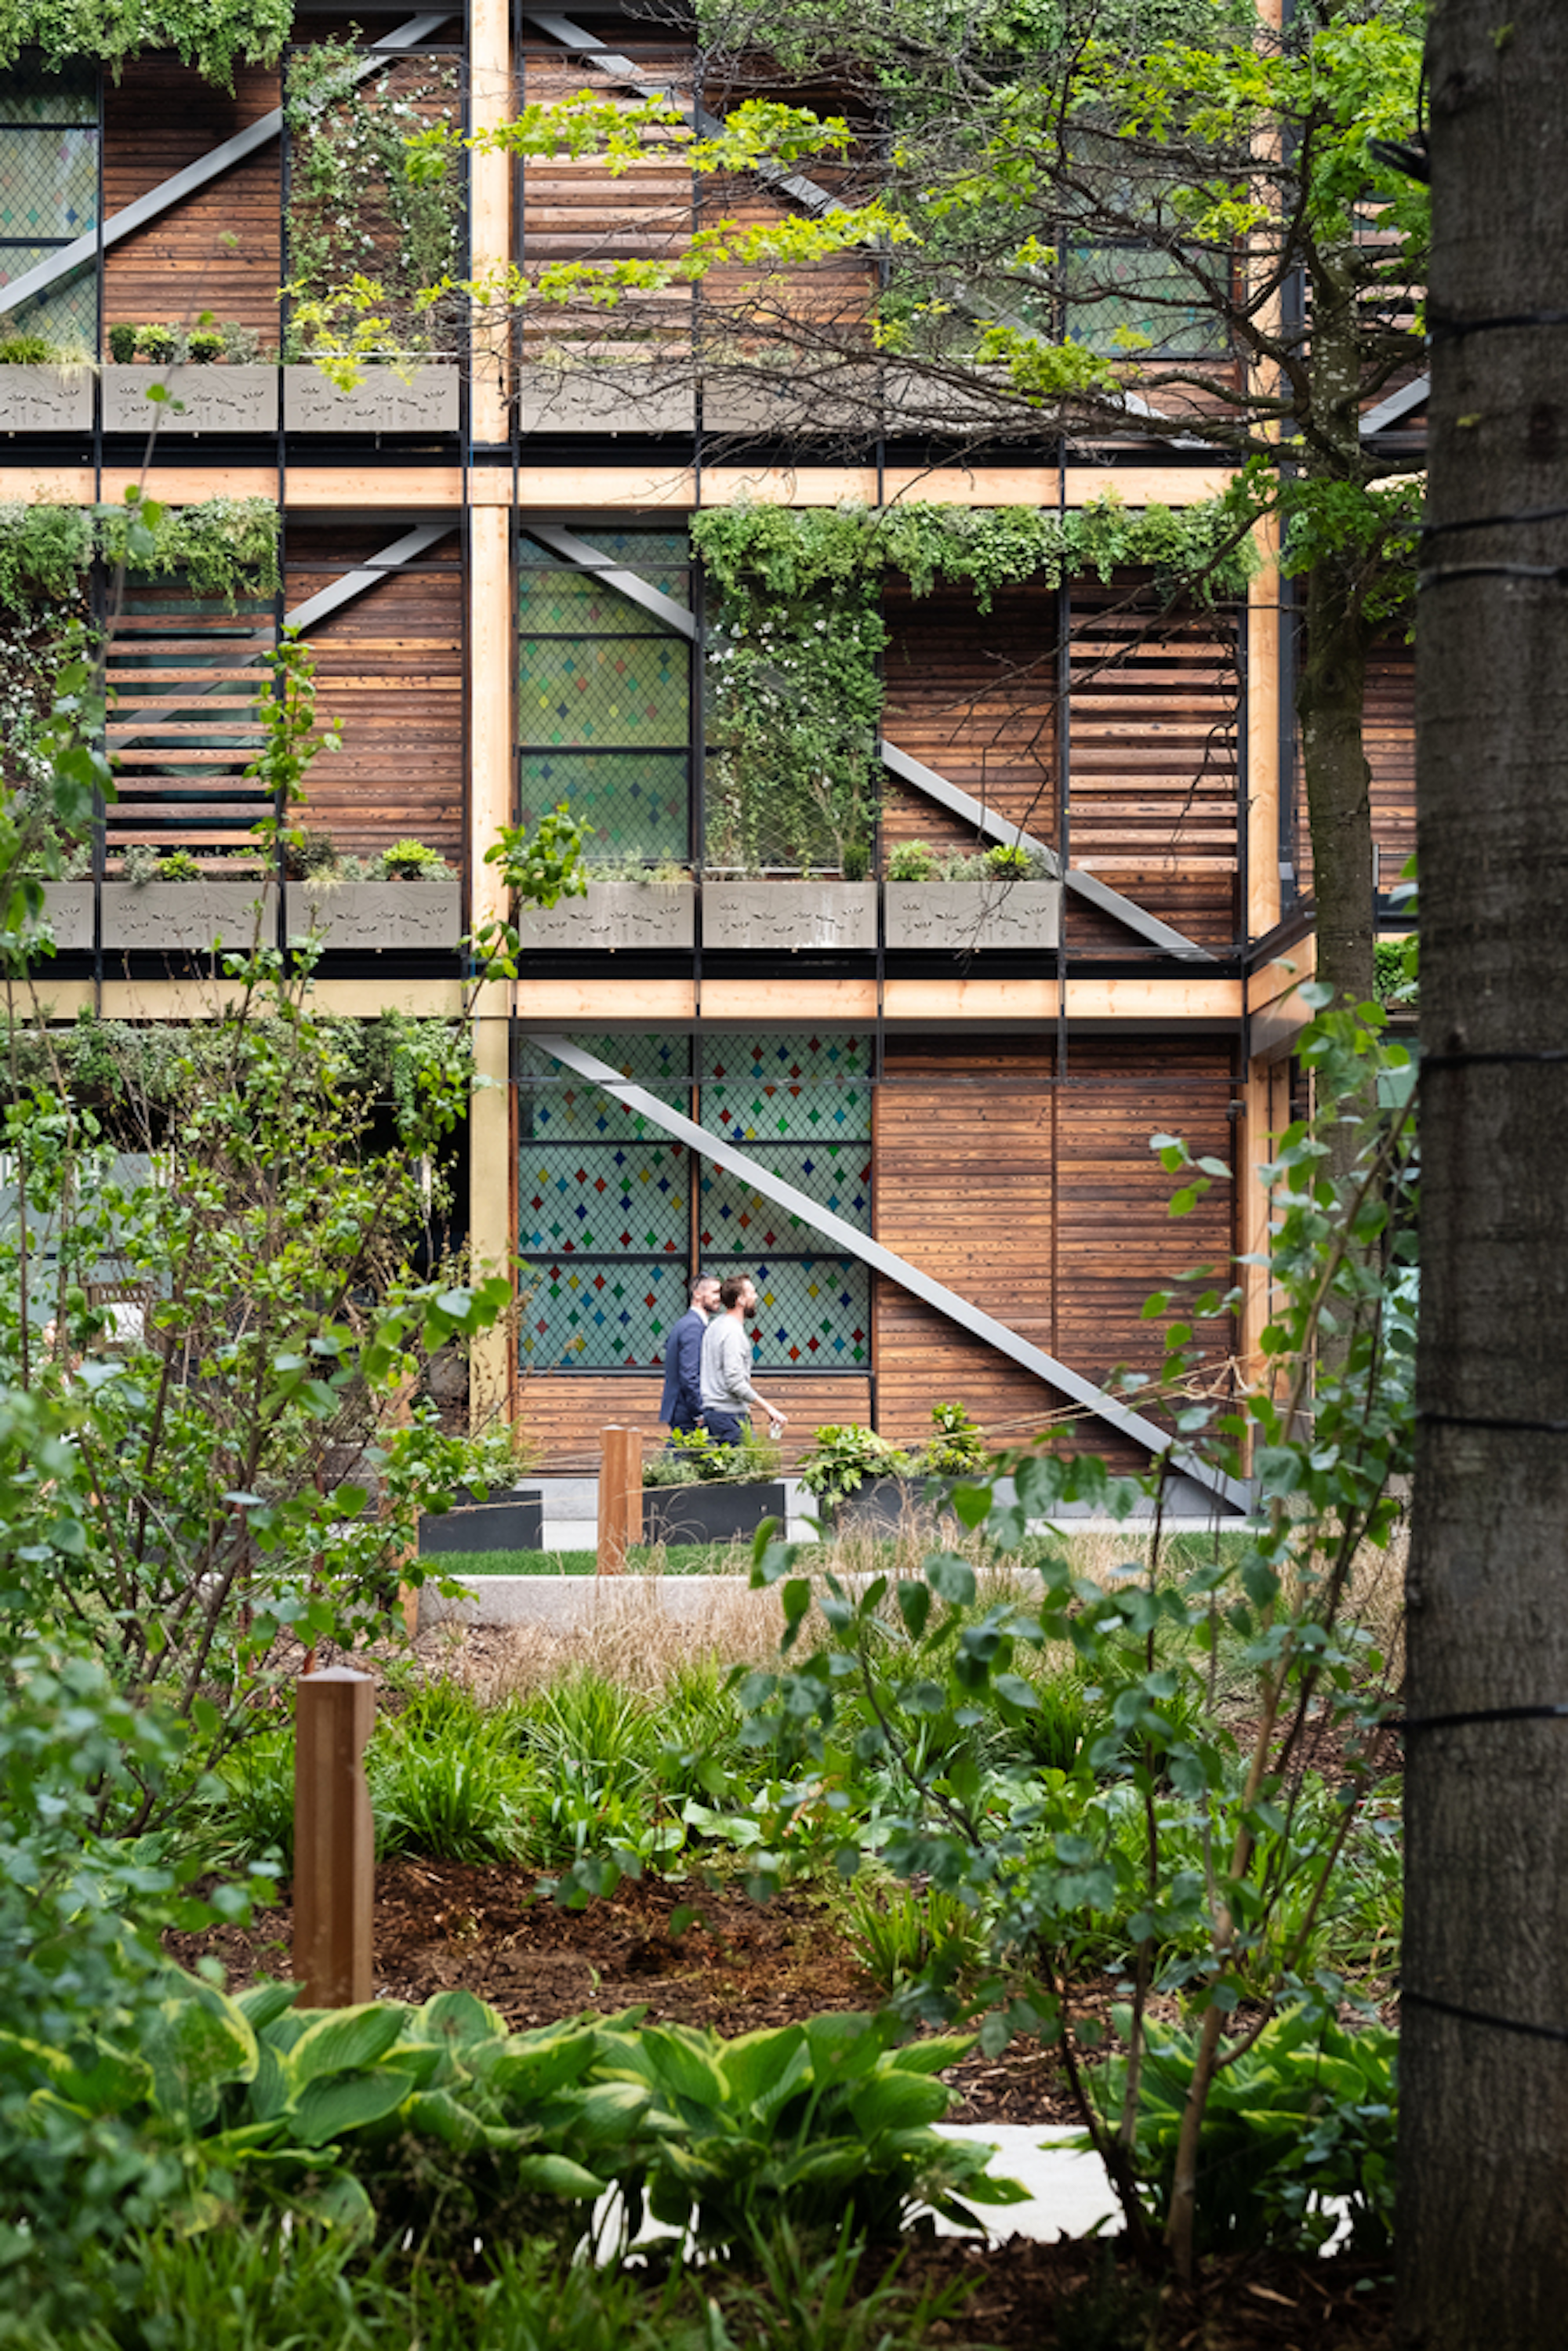 landscaped gardens looking onto sustainable wood building with planters